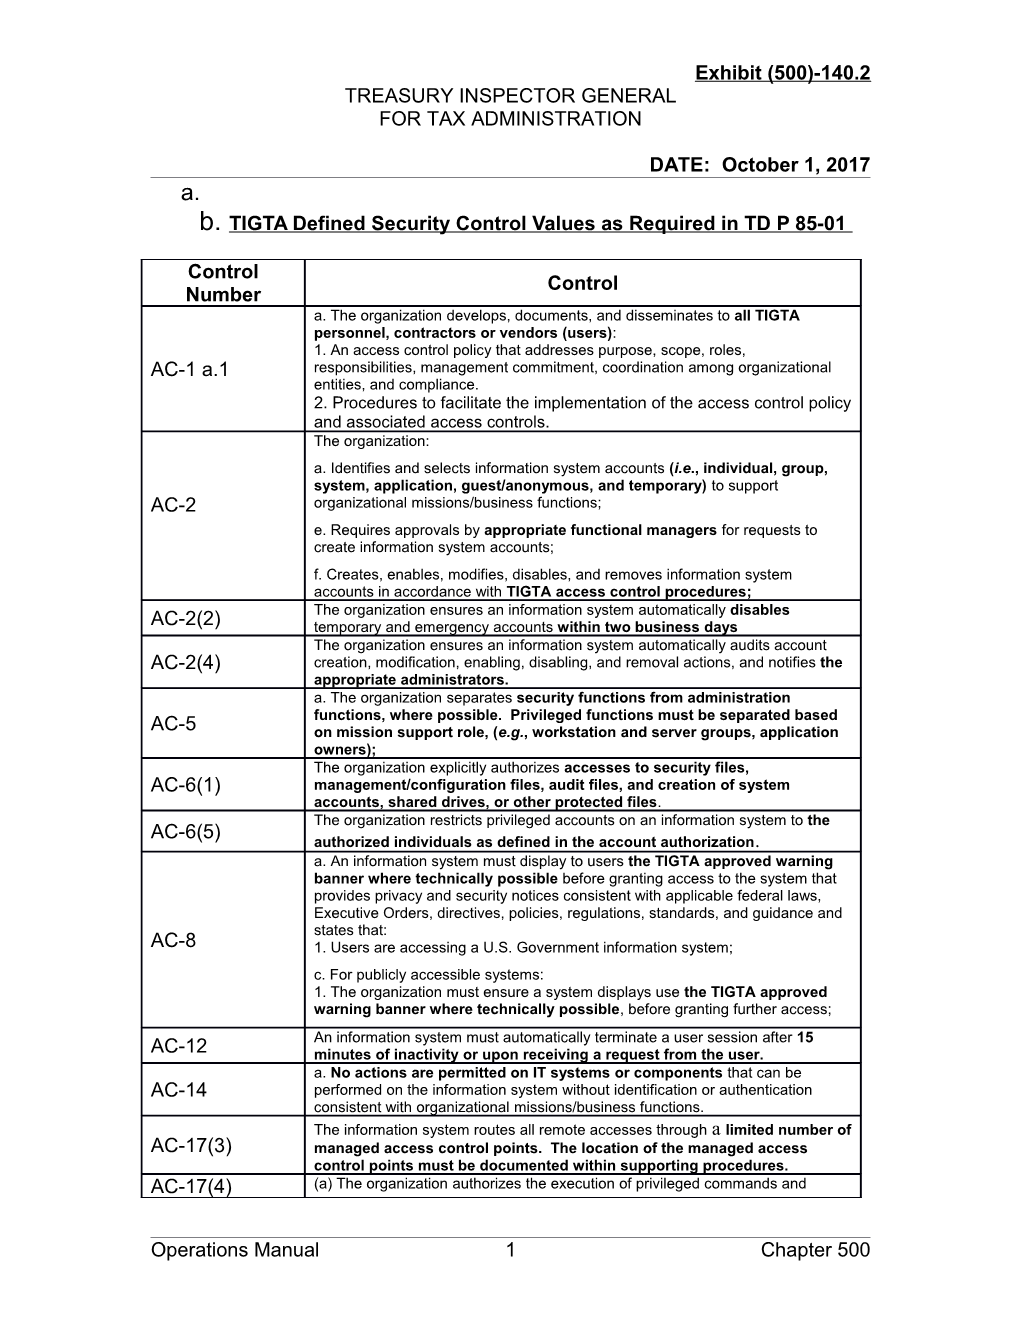 TIGTA Defined Security Control Values As Required in TD P 85-01